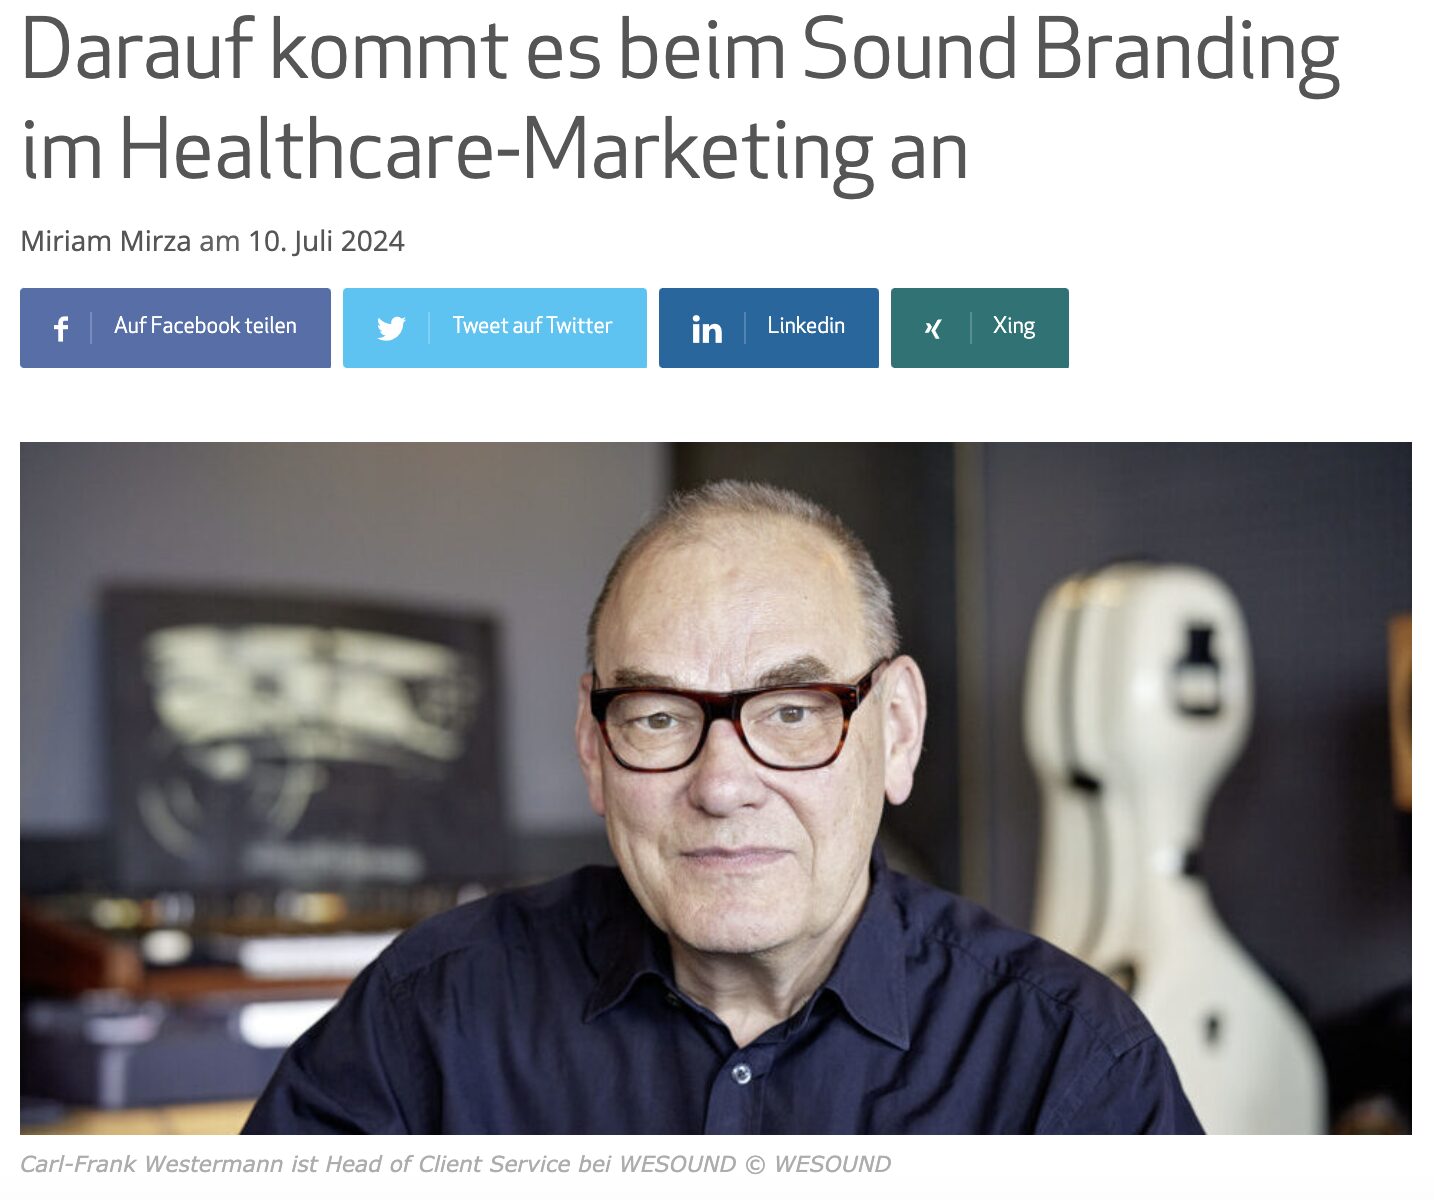 The magazine HEALTH RELATIONS spoke with Carl-Frank Westermann about audio branding for the pharmaceutical and healthcare industry. You can read the entire article here (in German).